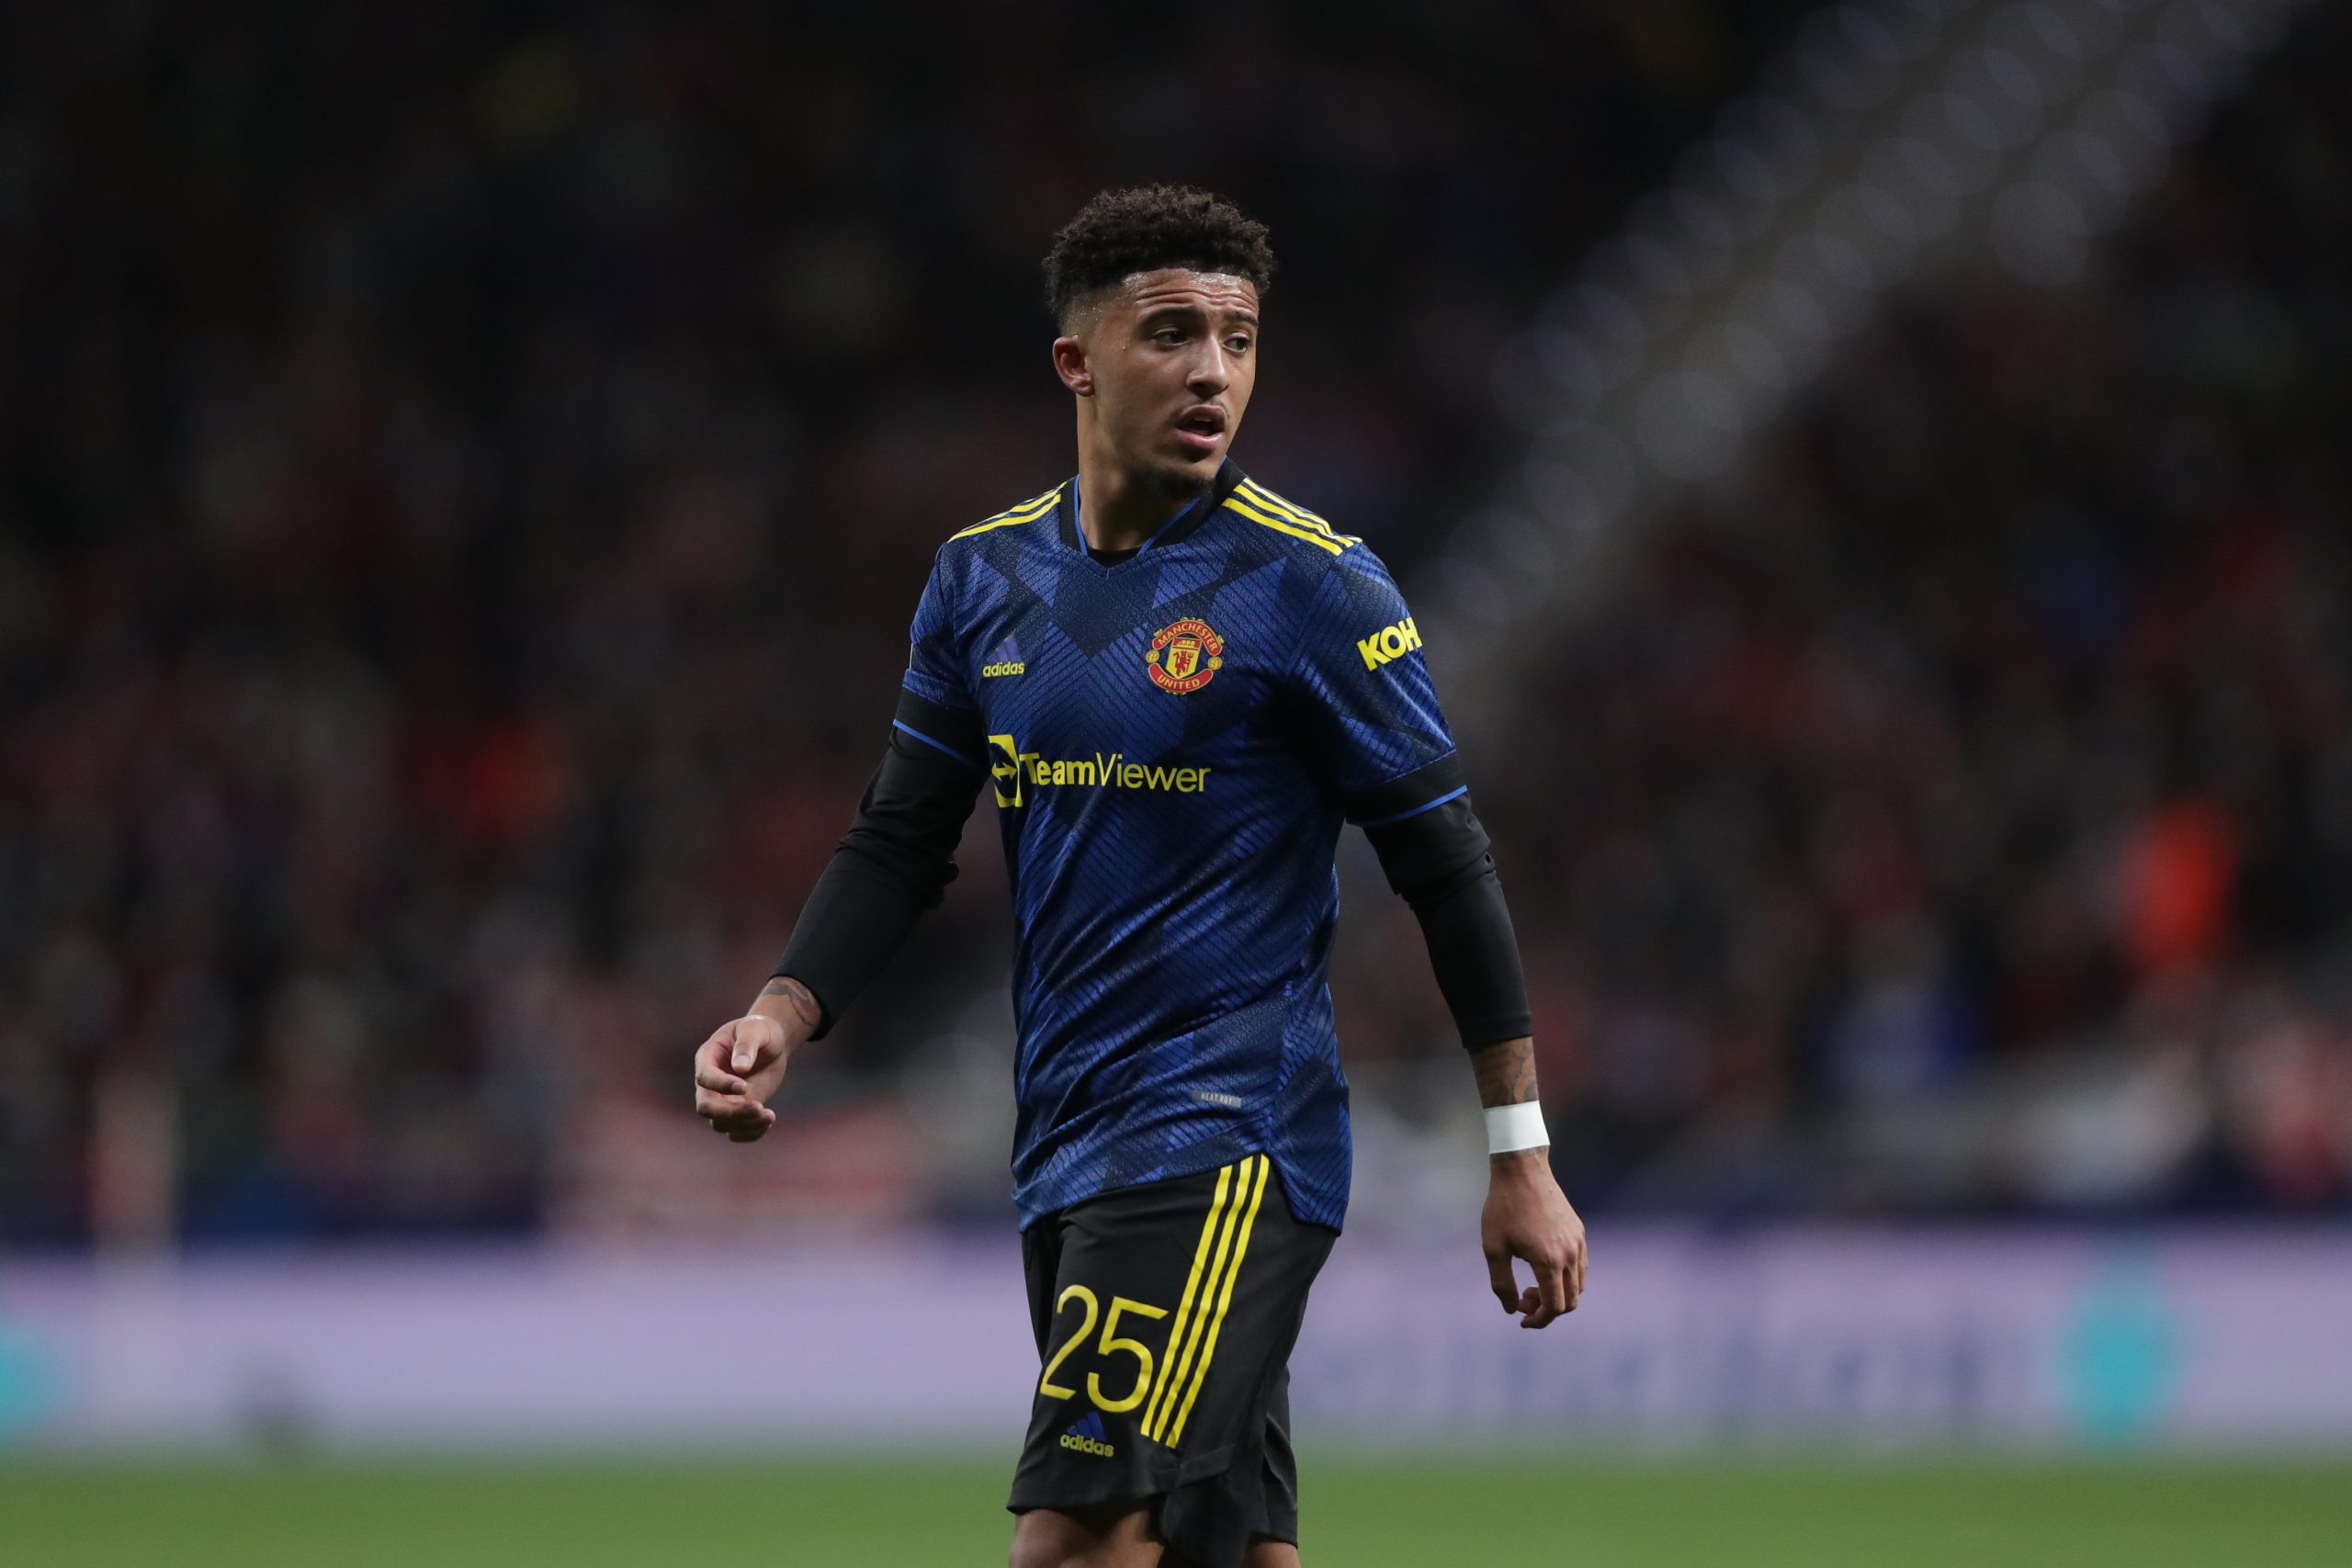 MADRID, SPAIN - FEBRUARY 23: Jadon Sancho of Manchester United in action during the UEFA Champions League Round Of Sixteen Leg One match between Atletico Madrid and Manchester United at Wanda Metropolitano on February 23, 2022 in Madrid, Spain. (Photo by Gonzalo Arroyo Moreno/Getty Images) The 4th Official uses images provided by the following image agency: Getty Images (https://www.gettyimages.de/) and Imago Images (https://www.imago-images.de/)